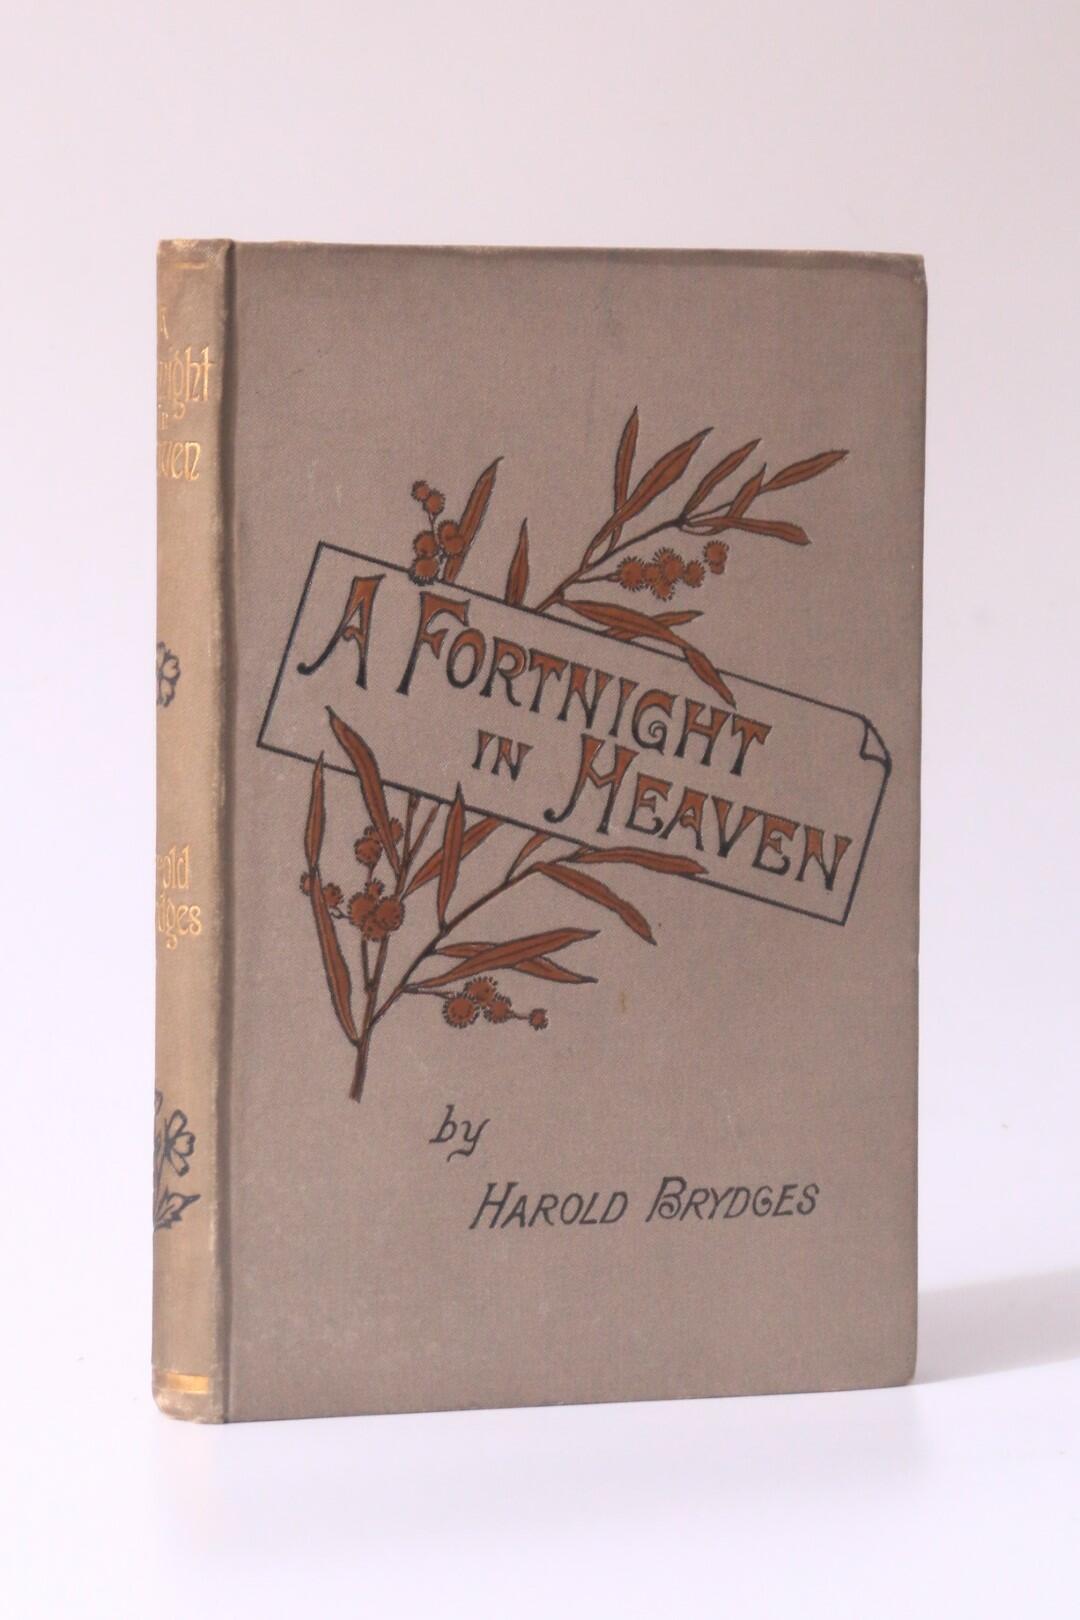 Harold Brydges - A Fortnight in Heaven - Henry Holt, 1886, First Edition.